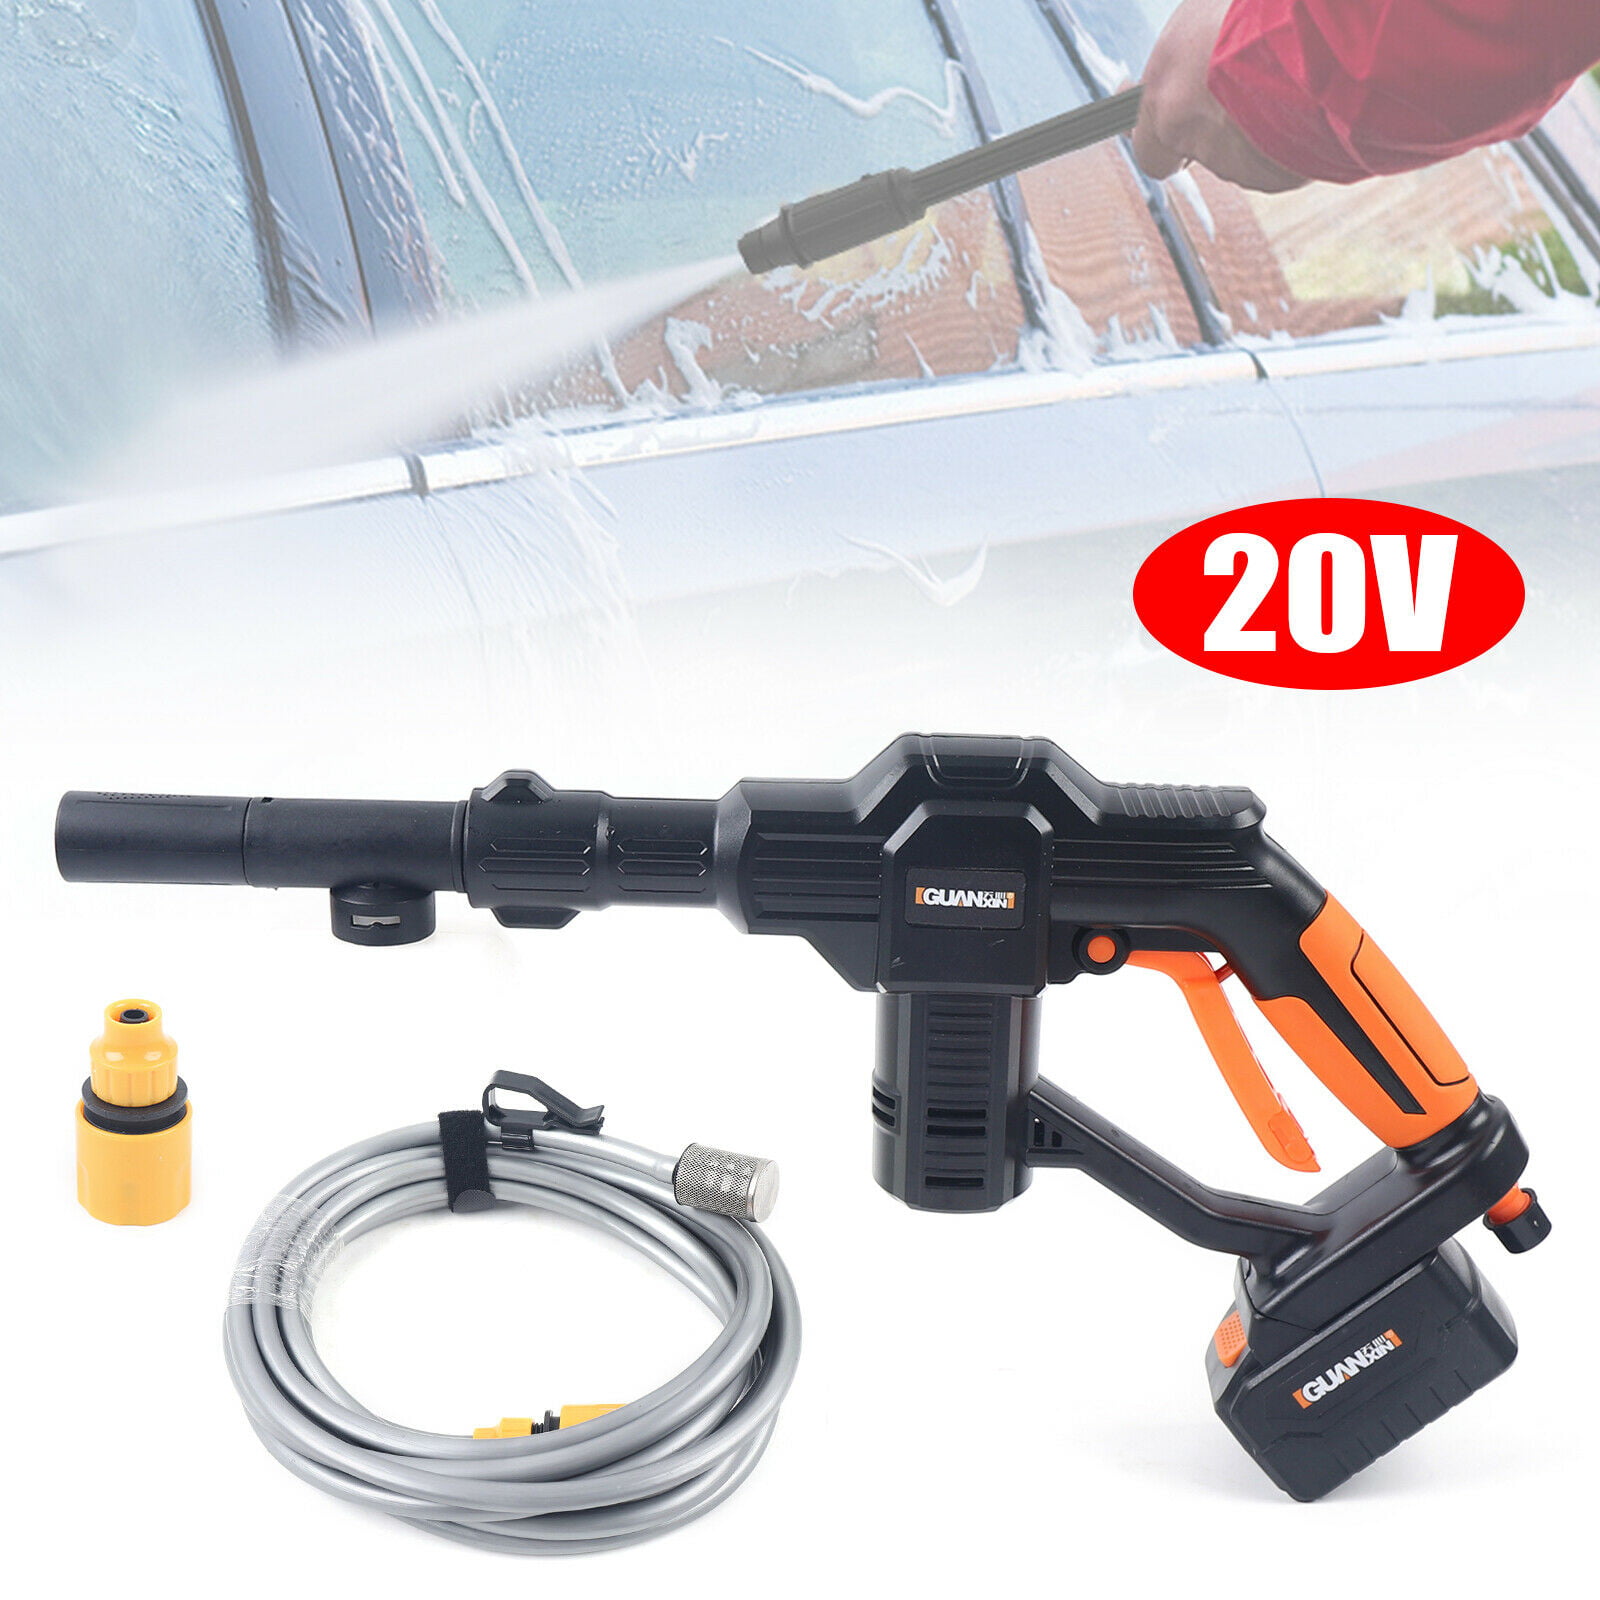 Car Body and Ground Washer High Pressure 4 Spray Nozzle Water Tool Cleaning USA 